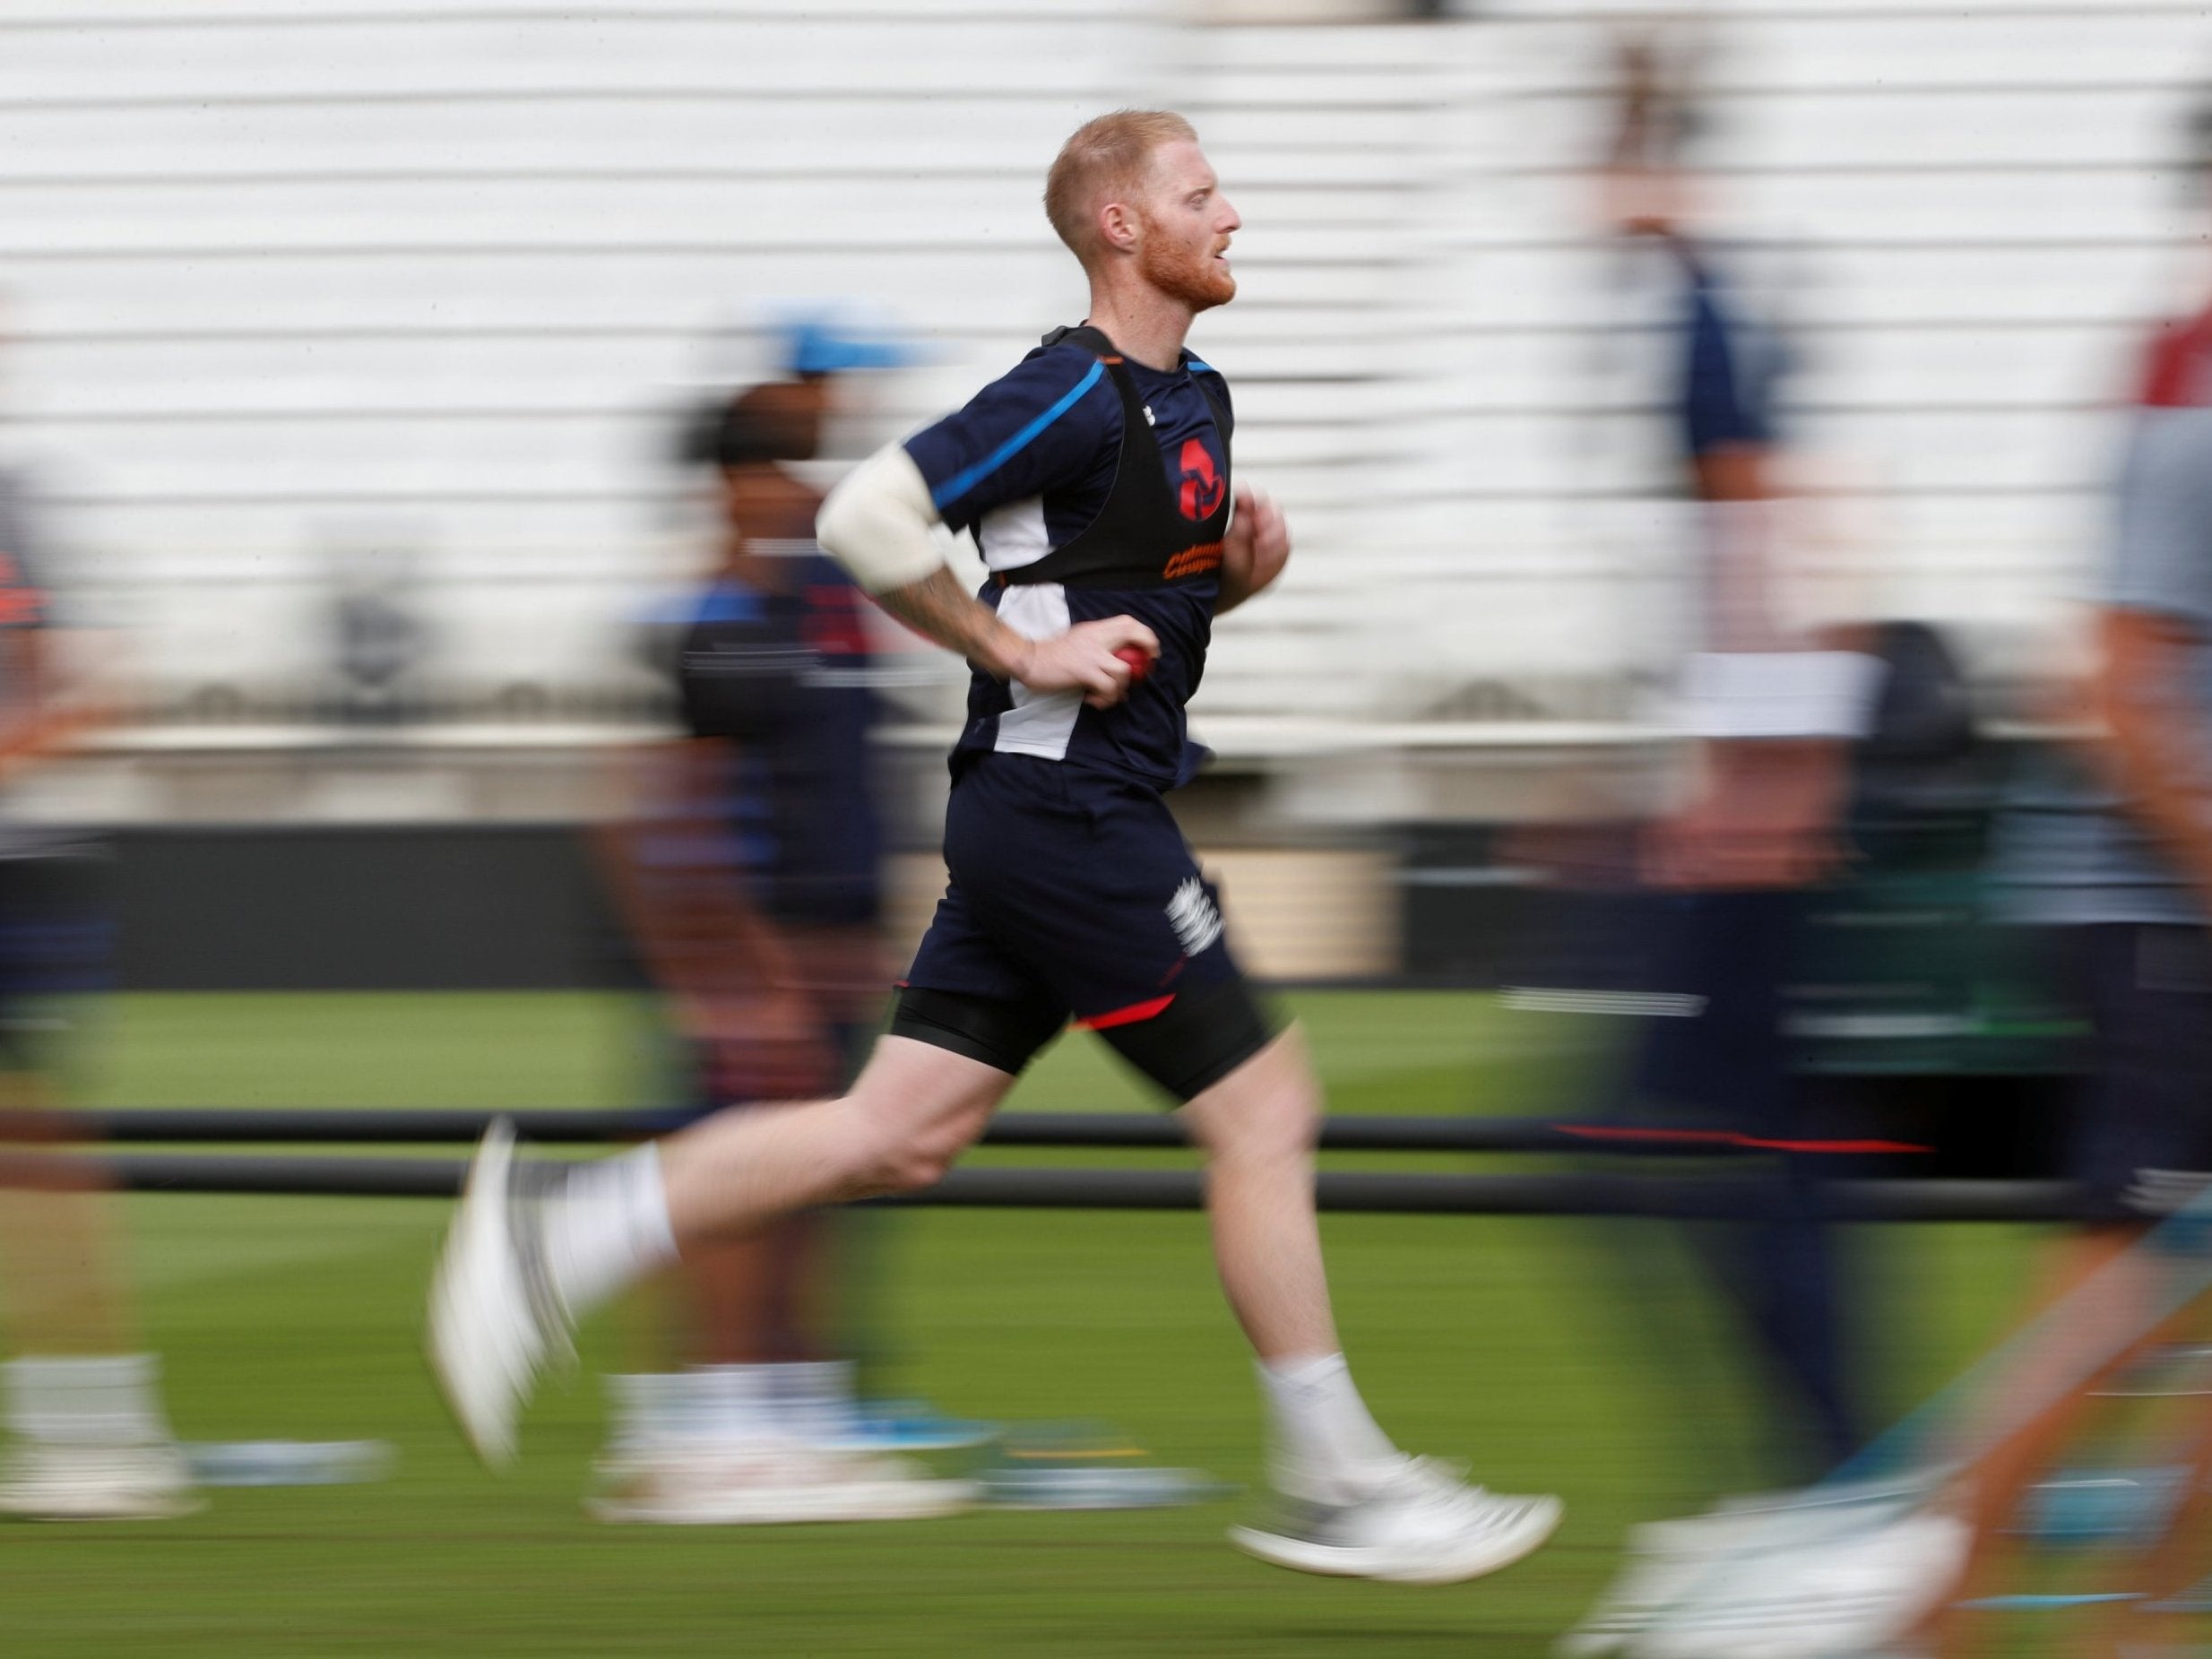 Ben Stokes has been swiftly returned to the England setup